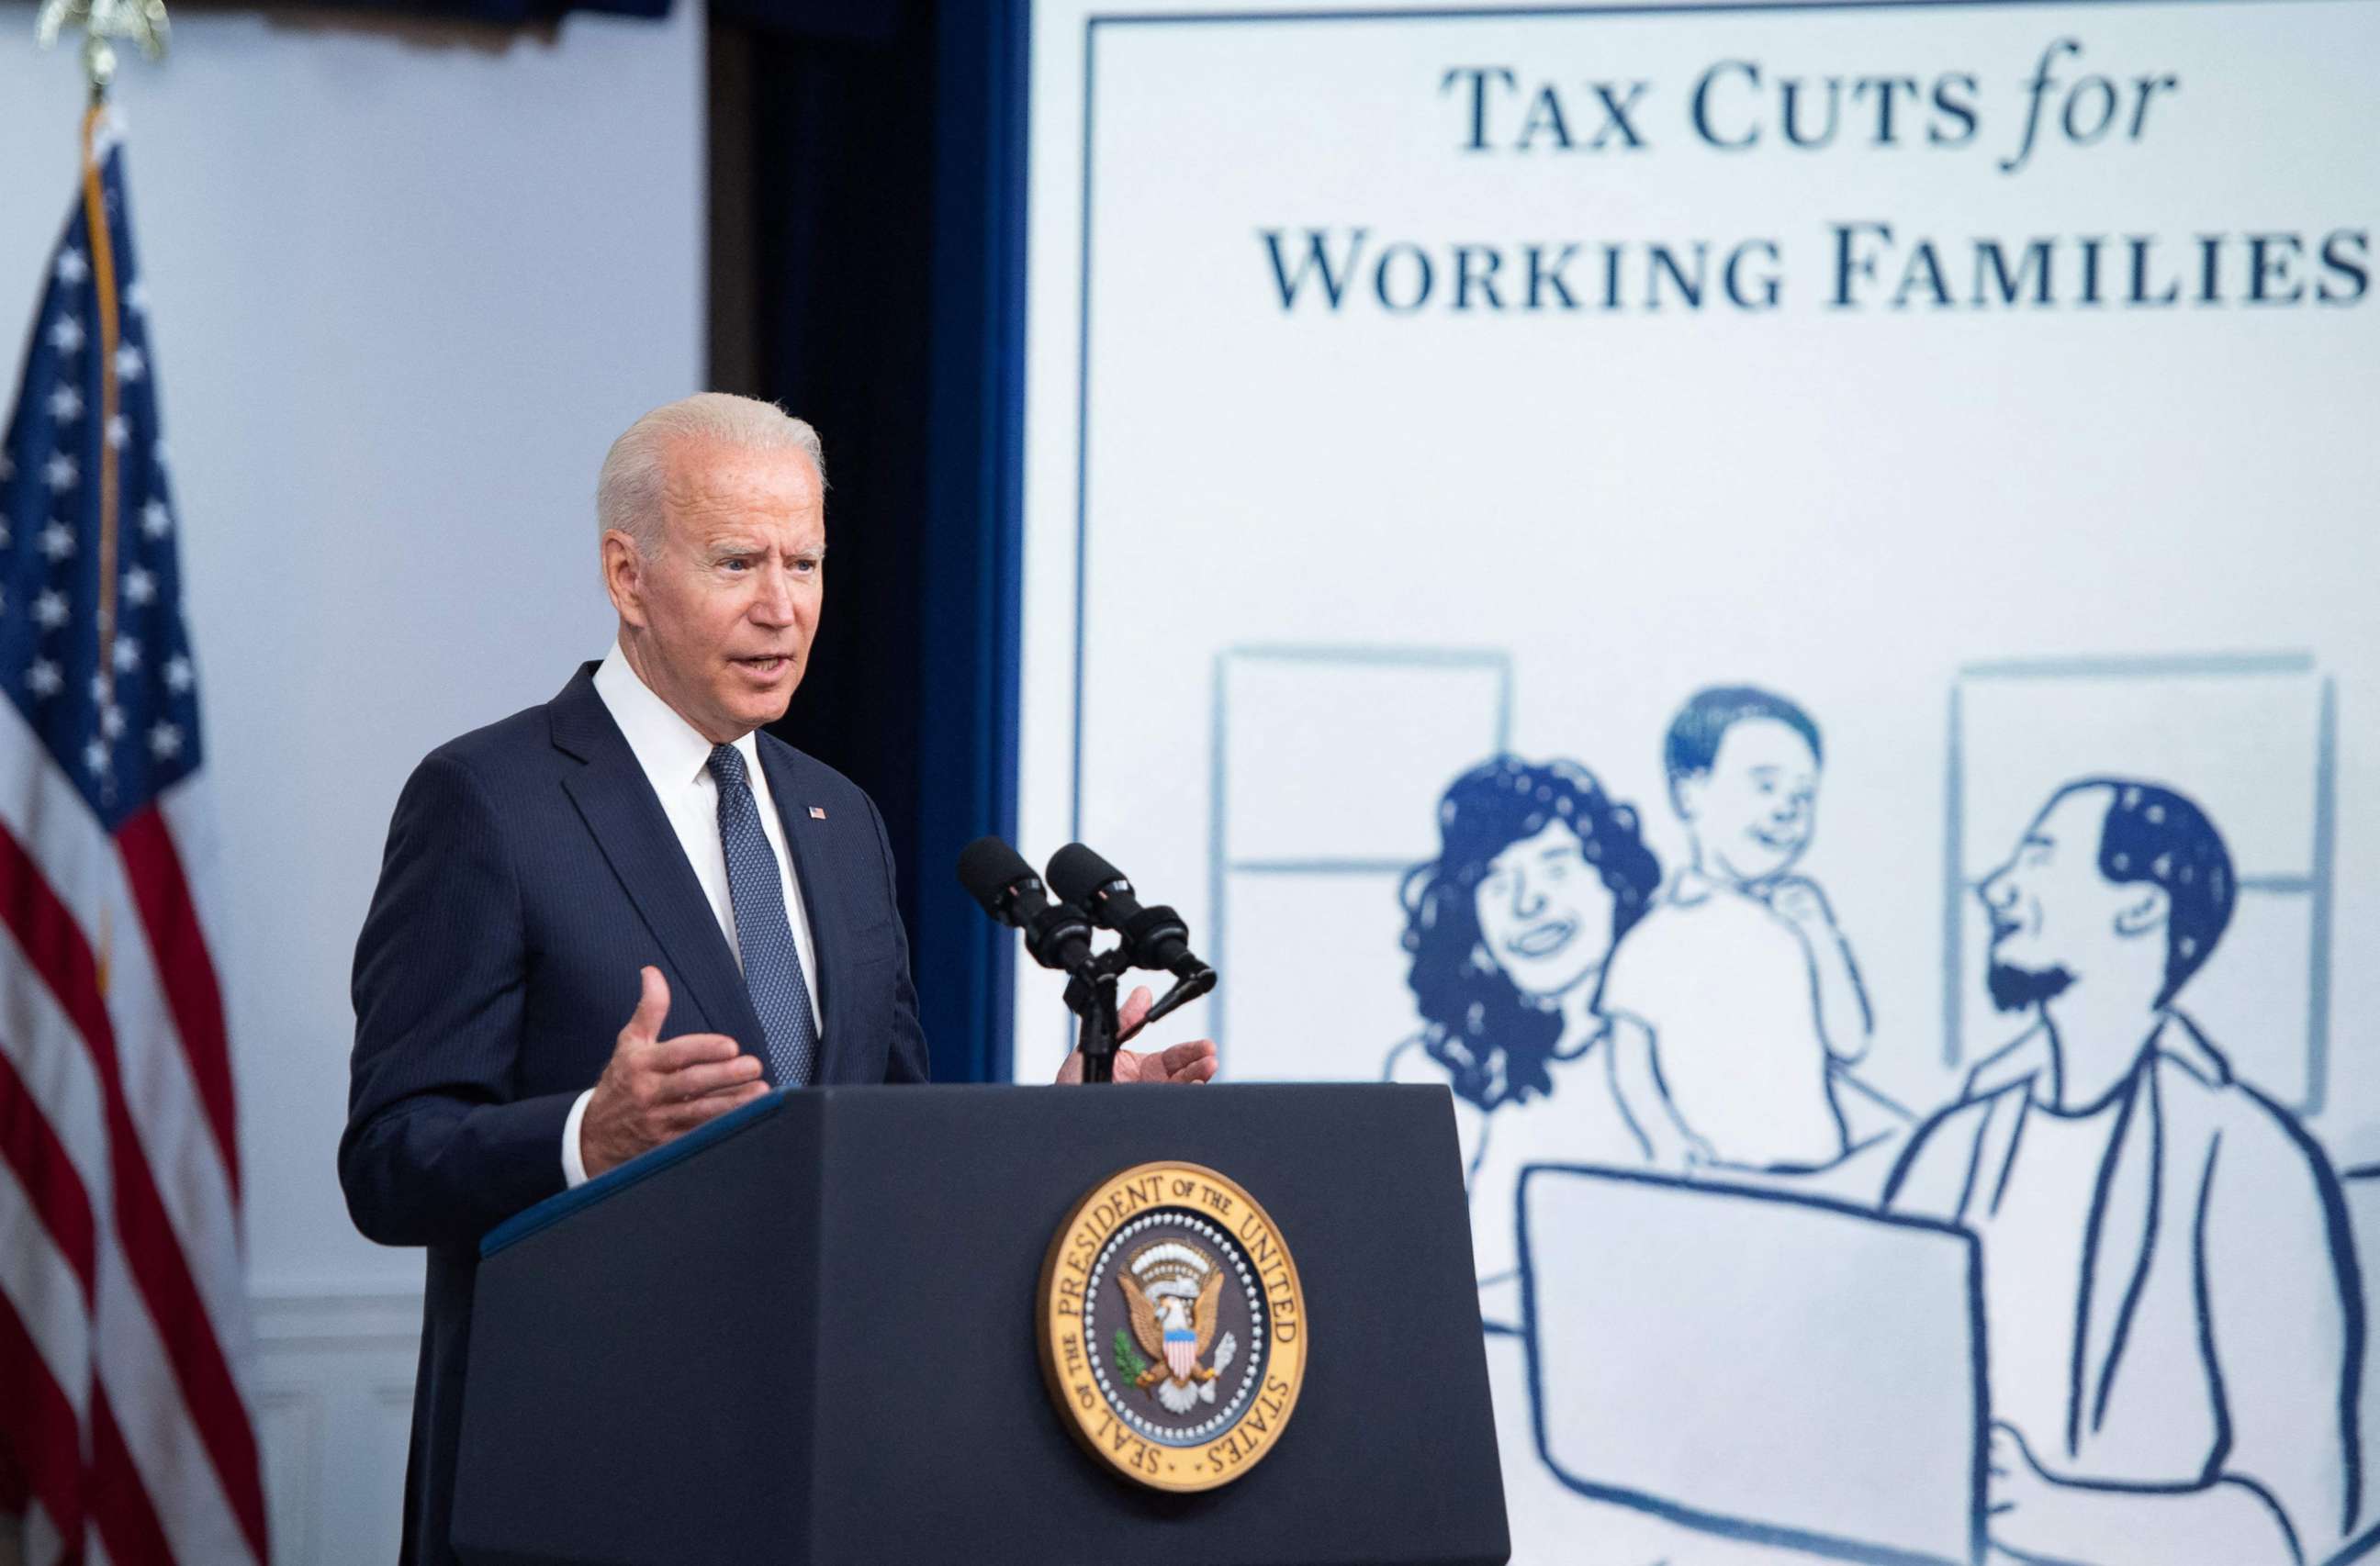 PHOTO: President Joe Biden speaks about the Child Tax Credit relief payments that are part of the American Rescue Plan during an event in the Eisenhower Executive Office Building in Washington, D.C., July 15, 2021.